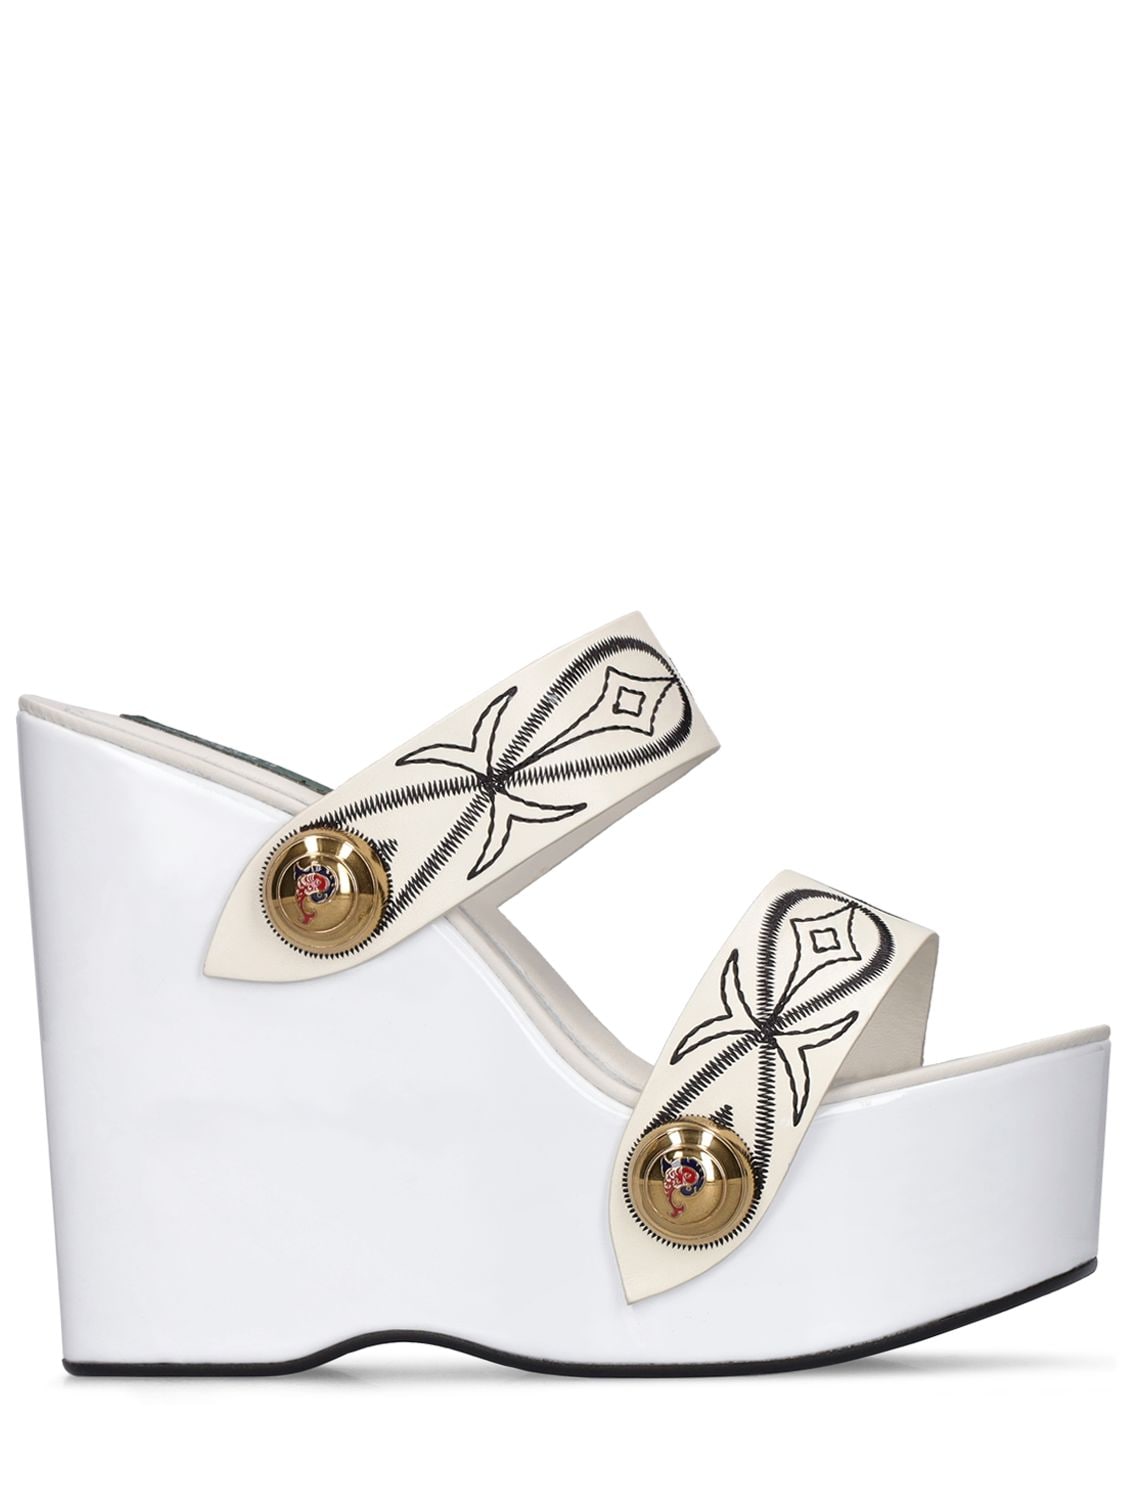 Pucci Embroidered Leather Wedge Sandals In White